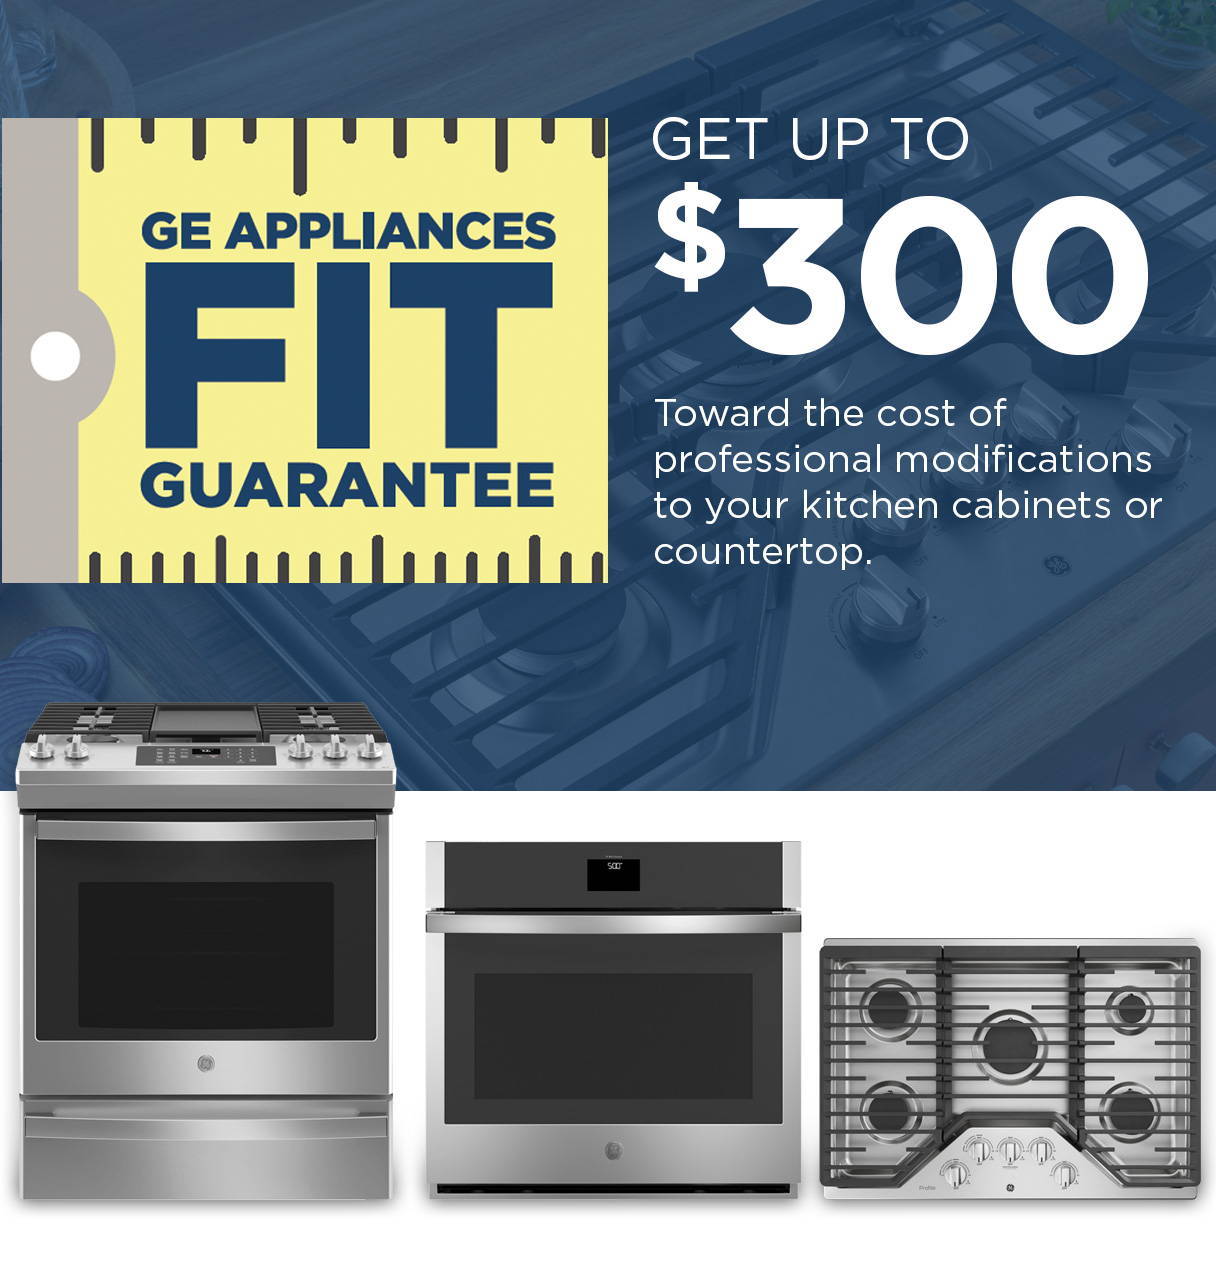 Special Offer: GE Appliances FIT Guarantee - get up to $300 toward teh cost of  professional modifications to your kitchen cabinets or countertop.